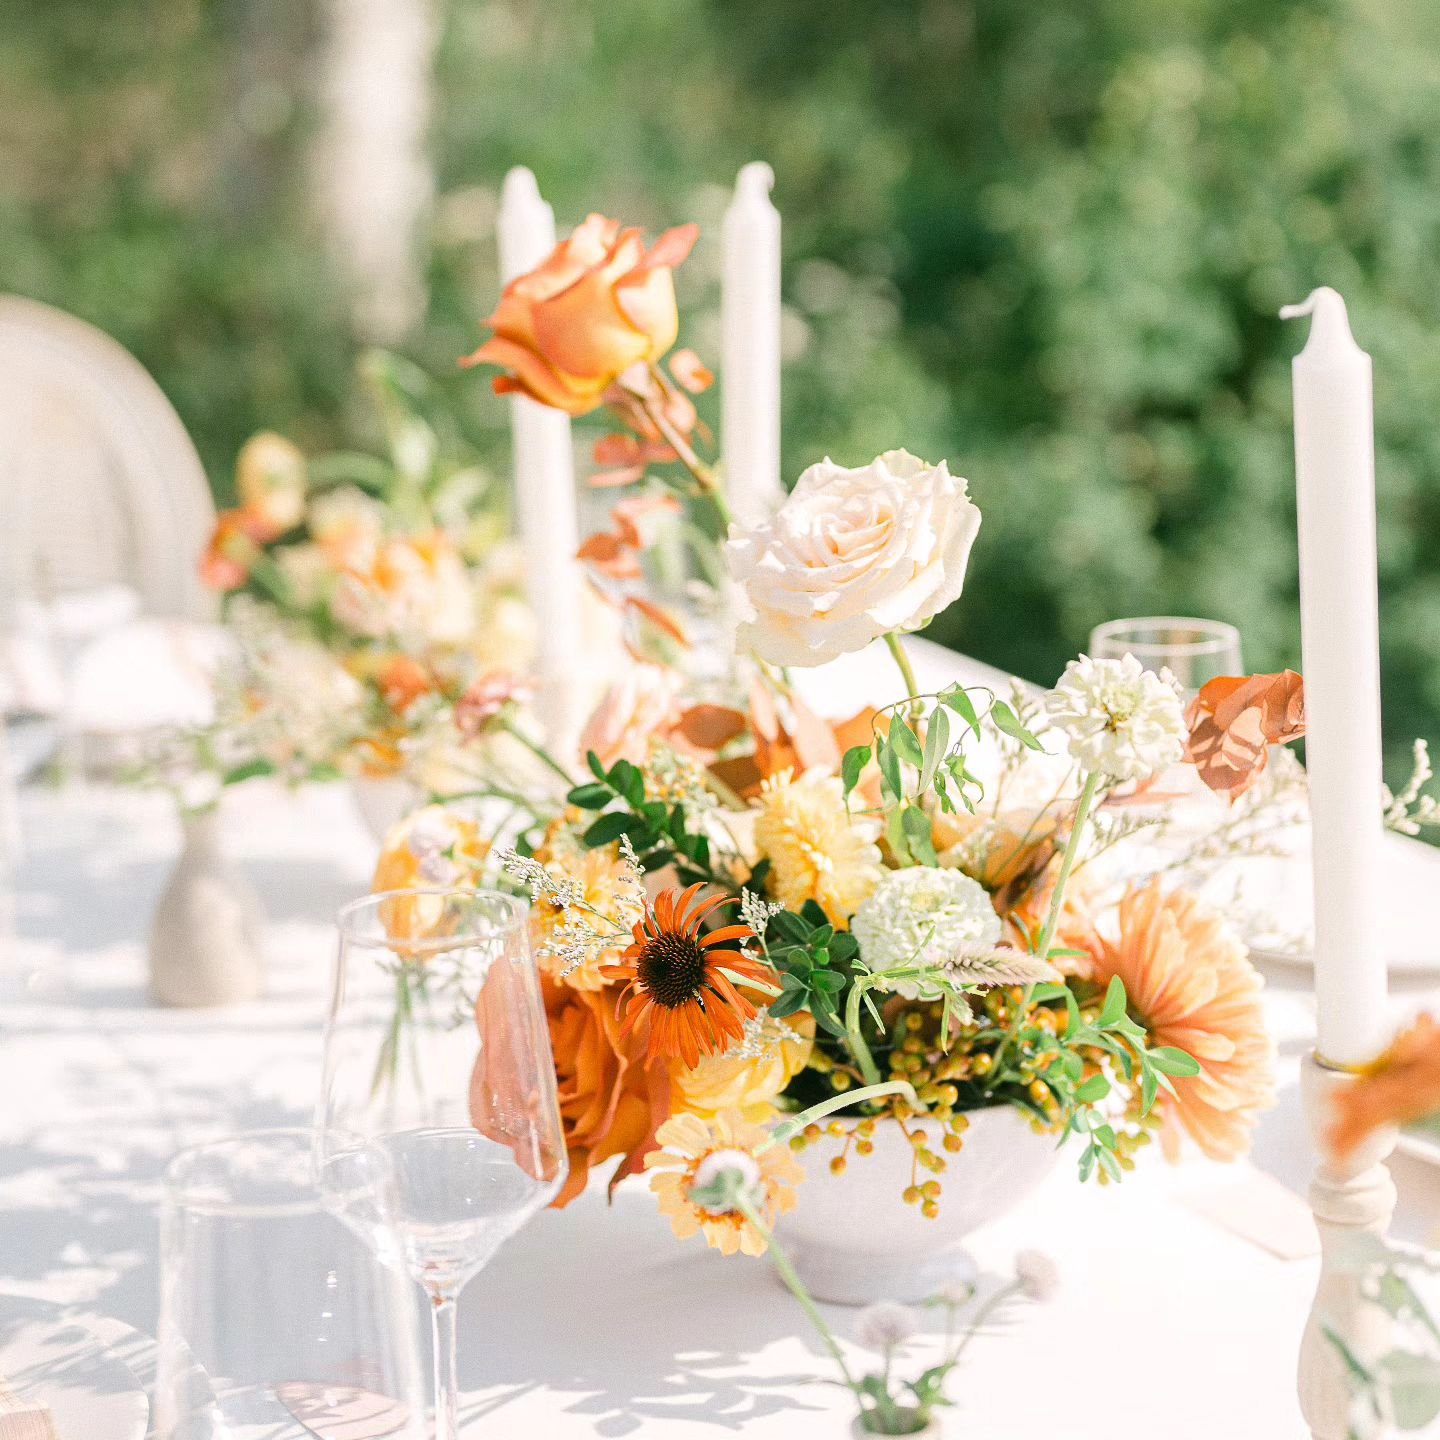 Hey all! Did you know there's usually a year or more lag from Pantone's Color of the Year announcement to its appearance in weddings? Brides and wedding designers get inspired when the color is revealed, but most weddings are booked 8 to 18 months in